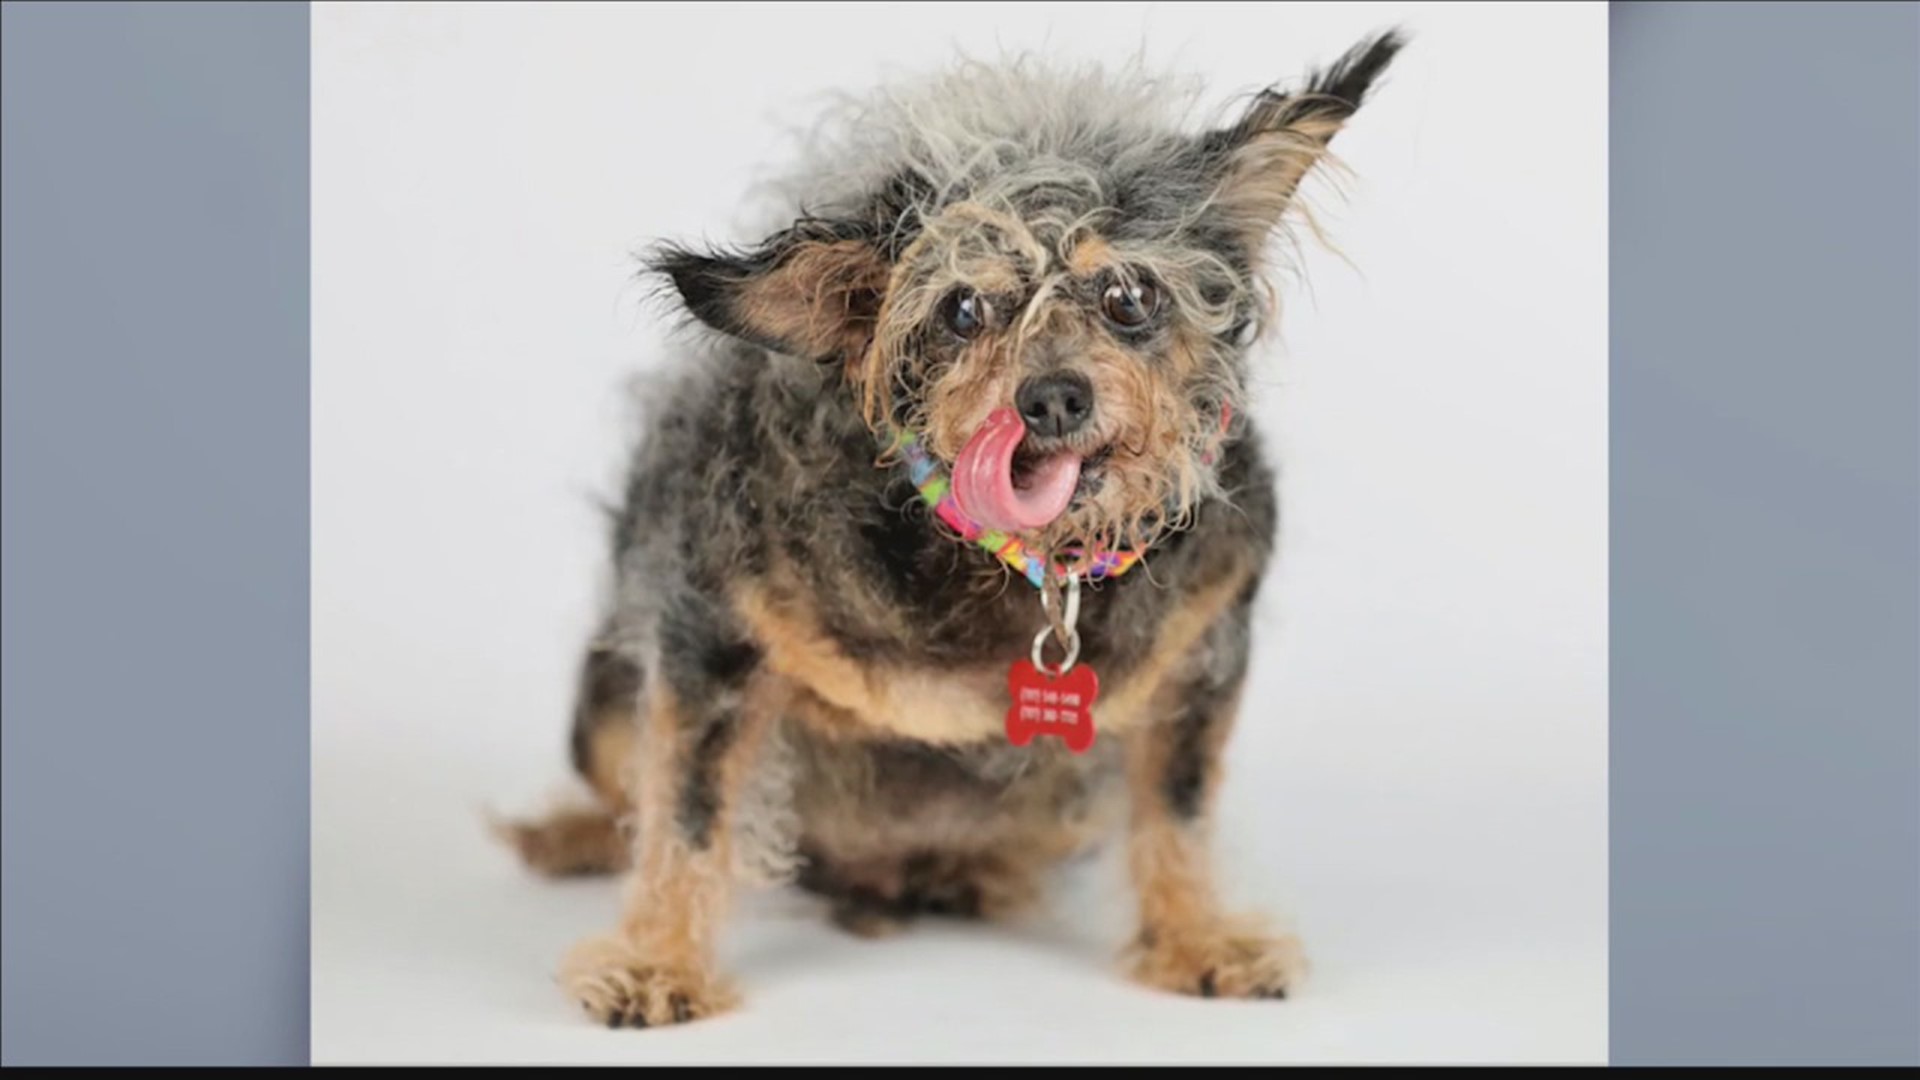 Scamp the Tramp is officially the world's ugliest dog.